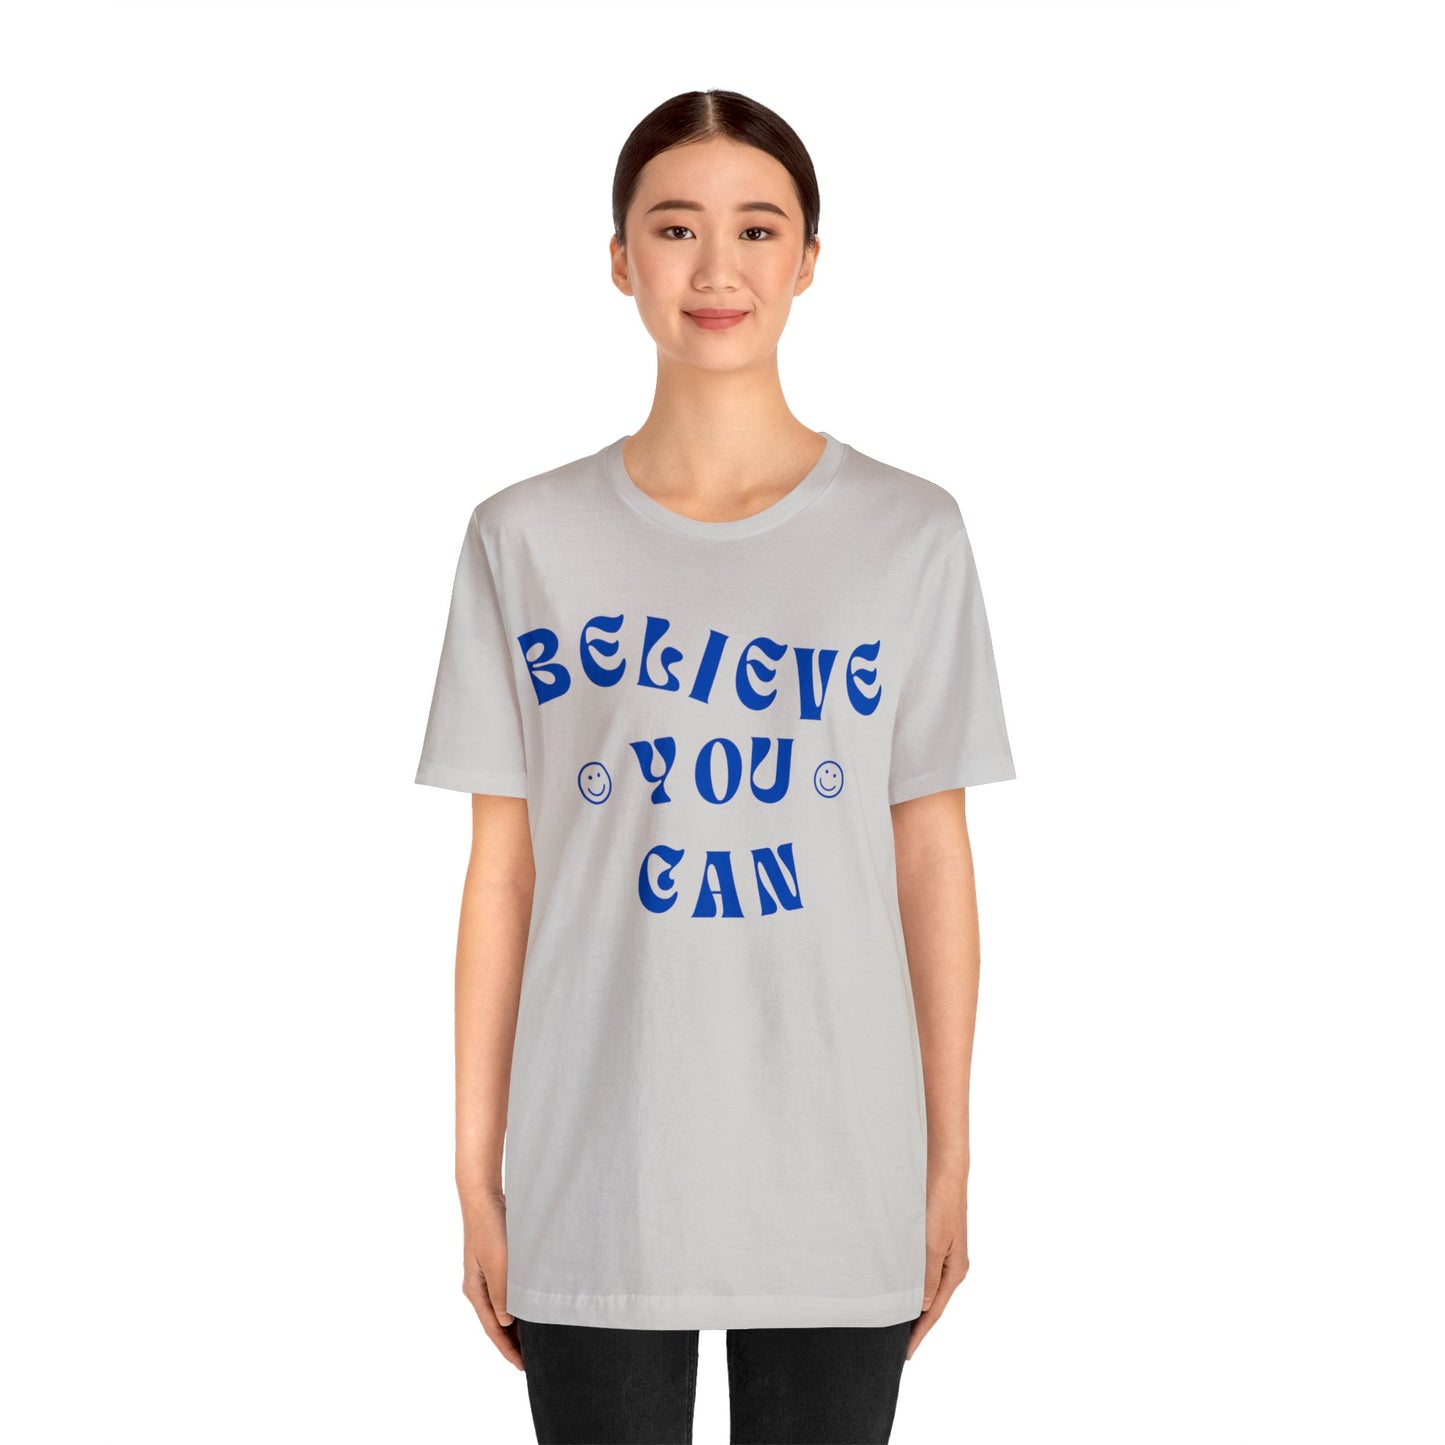 Believe You Can - Inspirational, Motivational T Shirt for Men and Women